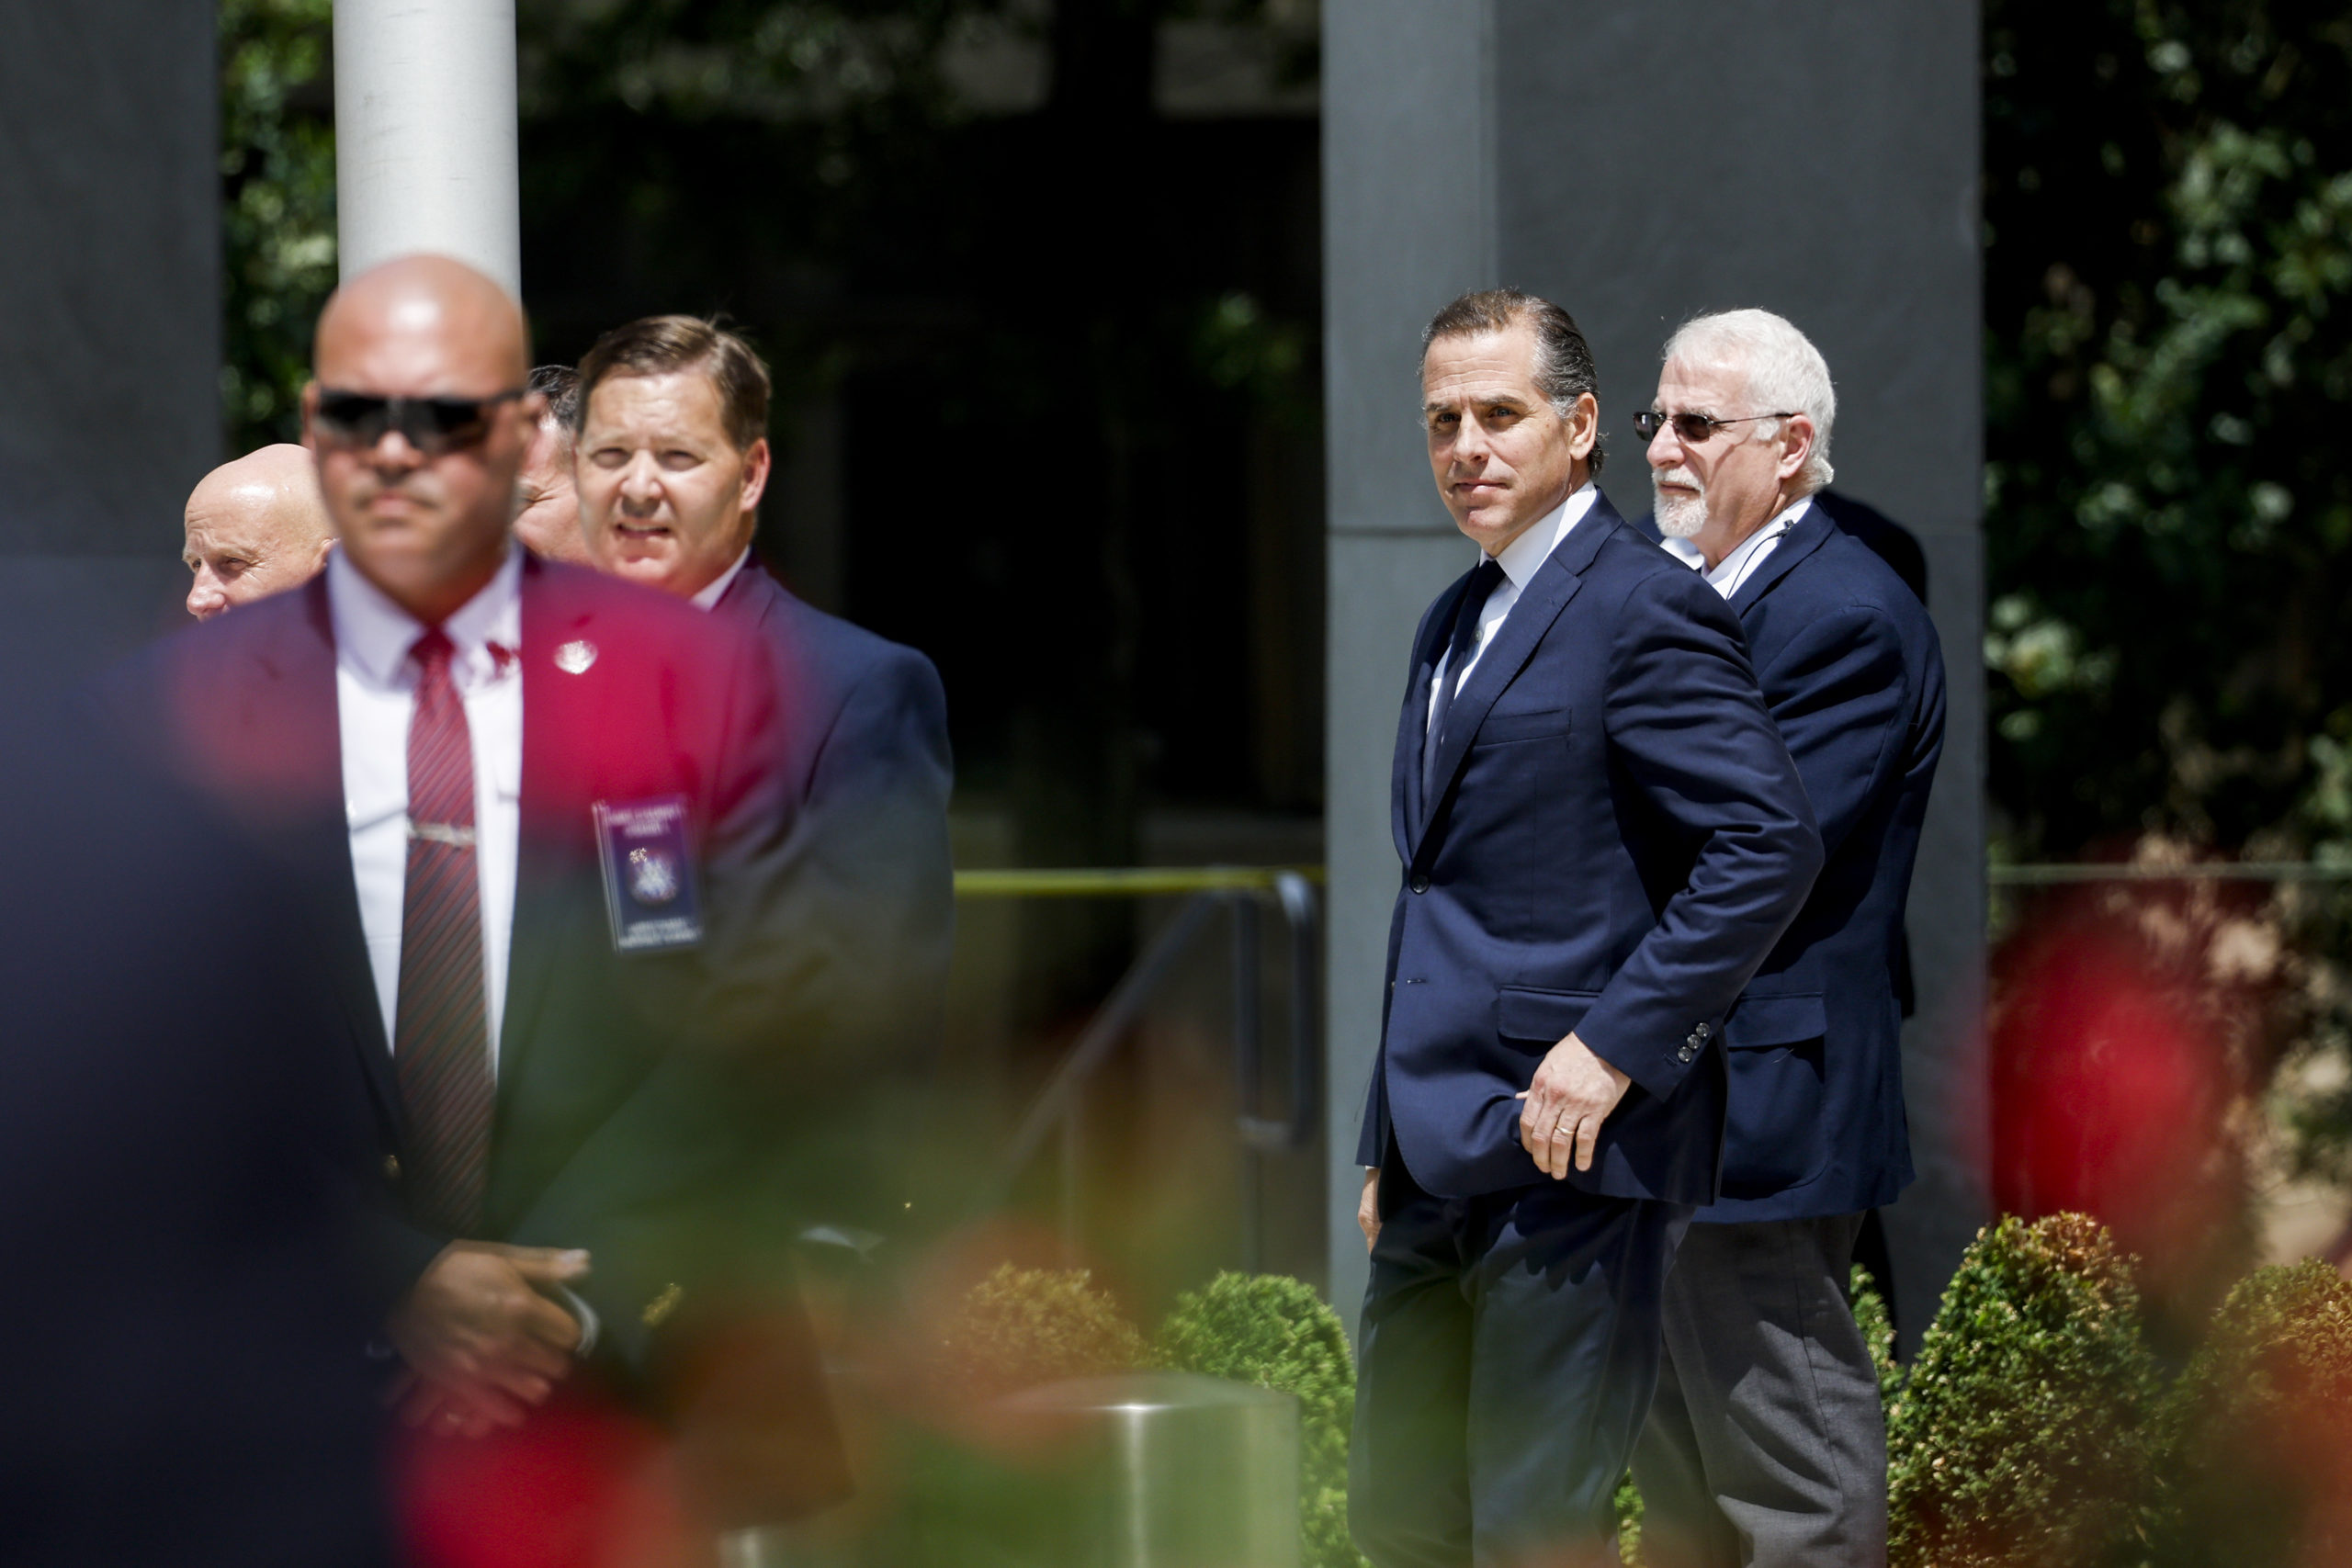 WILMINGTON, DELAWARE - JULY 26: Hunter Biden, son of U.S. President Joe Biden, departs to the J. Caleb Boggs Federal Building on July 26, 2023 in Wilmington, Delaware. Biden pleaded not guilty to two misdemeanor tax charges in a deal with prosecutors to avoid prosecution on an additional gun charge. However, the federal judge overseeing the case unexpectedly delayed Biden’s plea deal and deferred her decision until more information is put forth by both the prosecution and the defense. (Photo by Anna Moneymaker/Getty Images)